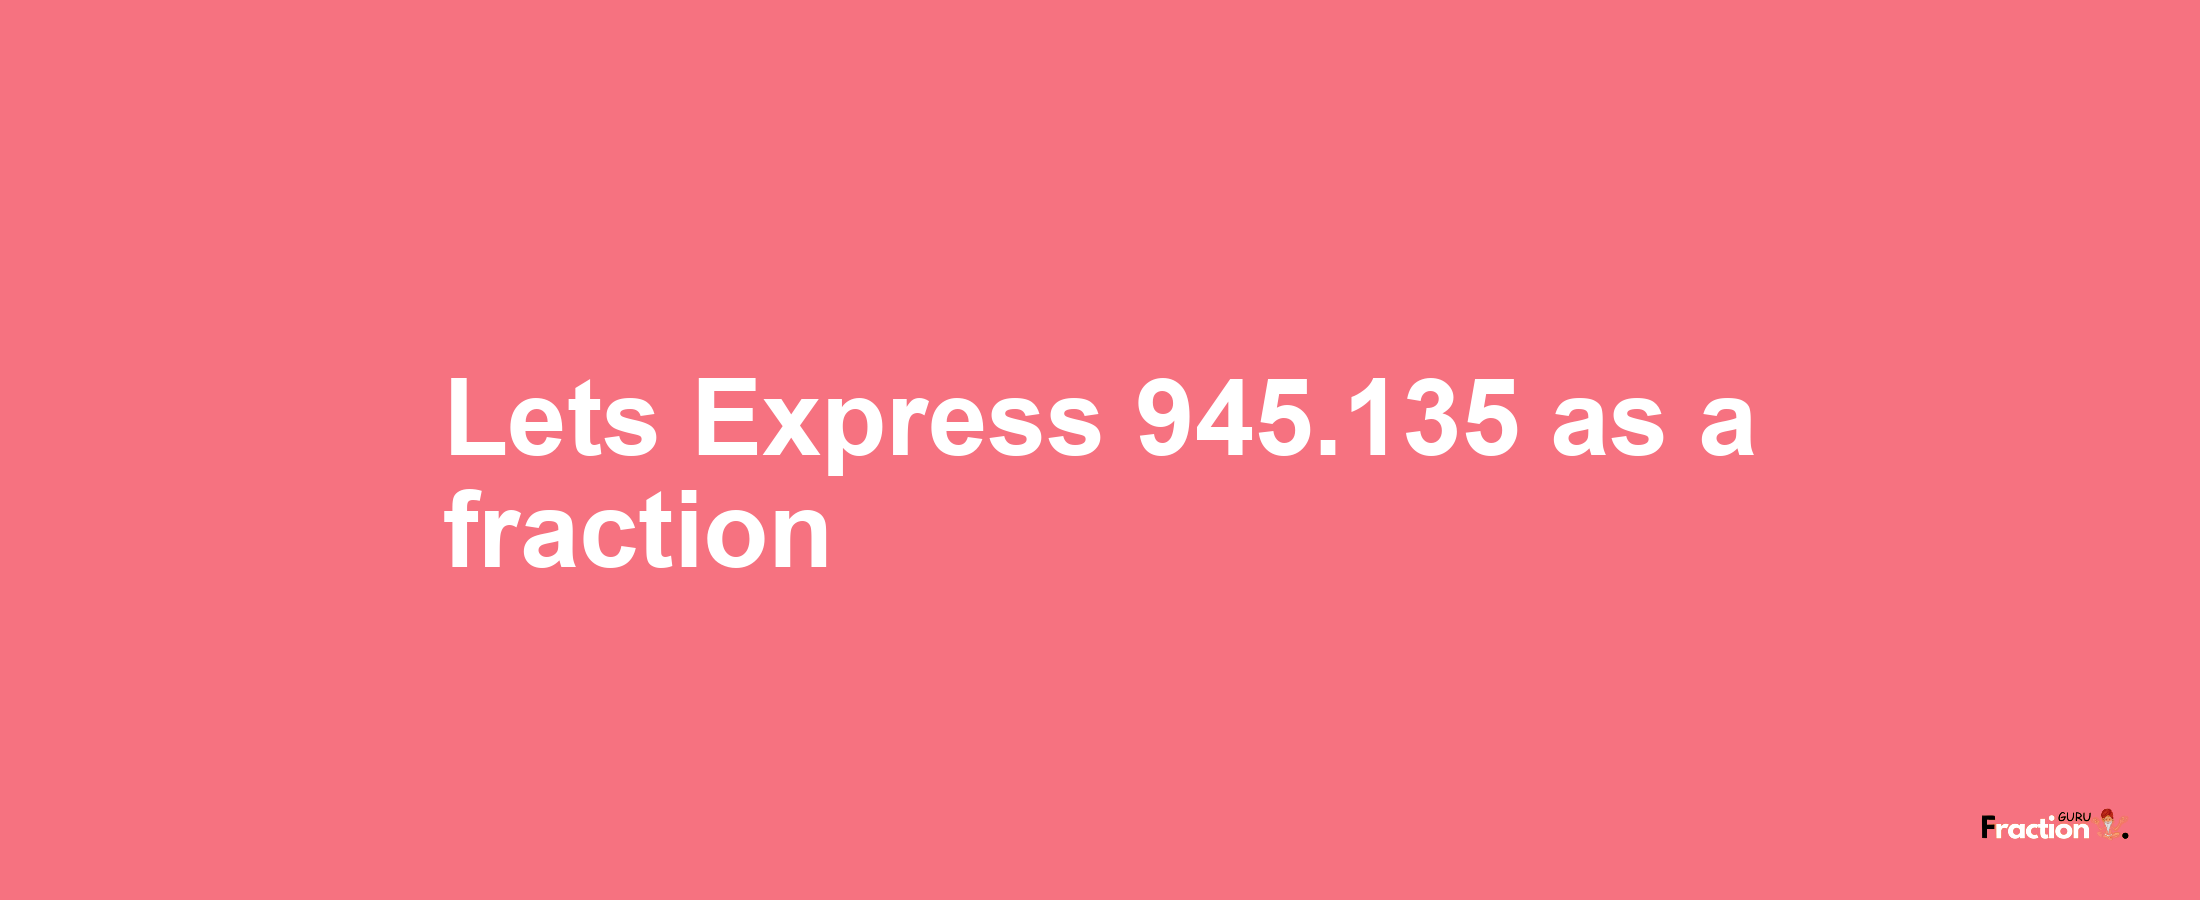 Lets Express 945.135 as afraction